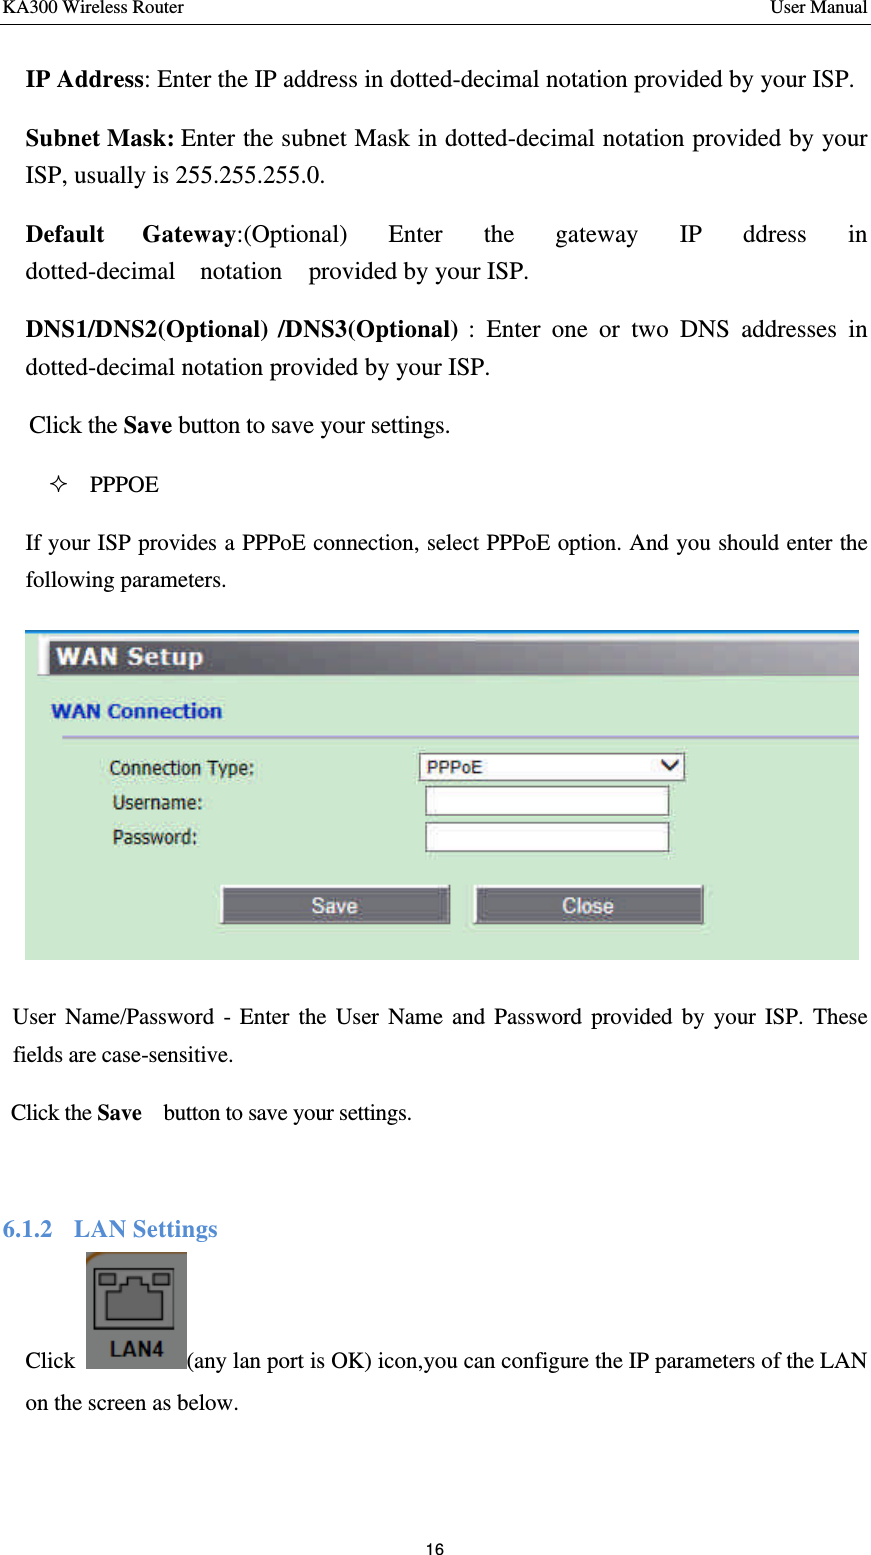 KA300 Wireless Router       User Manual 16  IP Address: Enter the IP address in dotted-decimal notation provided by your ISP.   Subnet Mask: Enter the subnet Mask in dotted-decimal notation provided by your ISP, usually is 255.255.255.0.   Default  Gateway:(Optional)  Enter  the  gateway  IP  ddress  in  dotted-decimal  notation    provided by your ISP.     DNS1/DNS2(Optional) /DNS3(Optional) : Enter one or two DNS addresses in dotted-decimal notation provided by your ISP.   Click the Save button to save your settings.   ² PPPOE If your ISP provides a PPPoE connection, select PPPoE option. And you should enter the following parameters.  User Name/Password - Enter the User Name and Password provided by your ISP. These fields are case-sensitive. Click the Save   button to save your settings.  6.1.2  LAN Settings Click  (any lan port is OK) icon,you can configure the IP parameters of the LAN on the screen as below.       